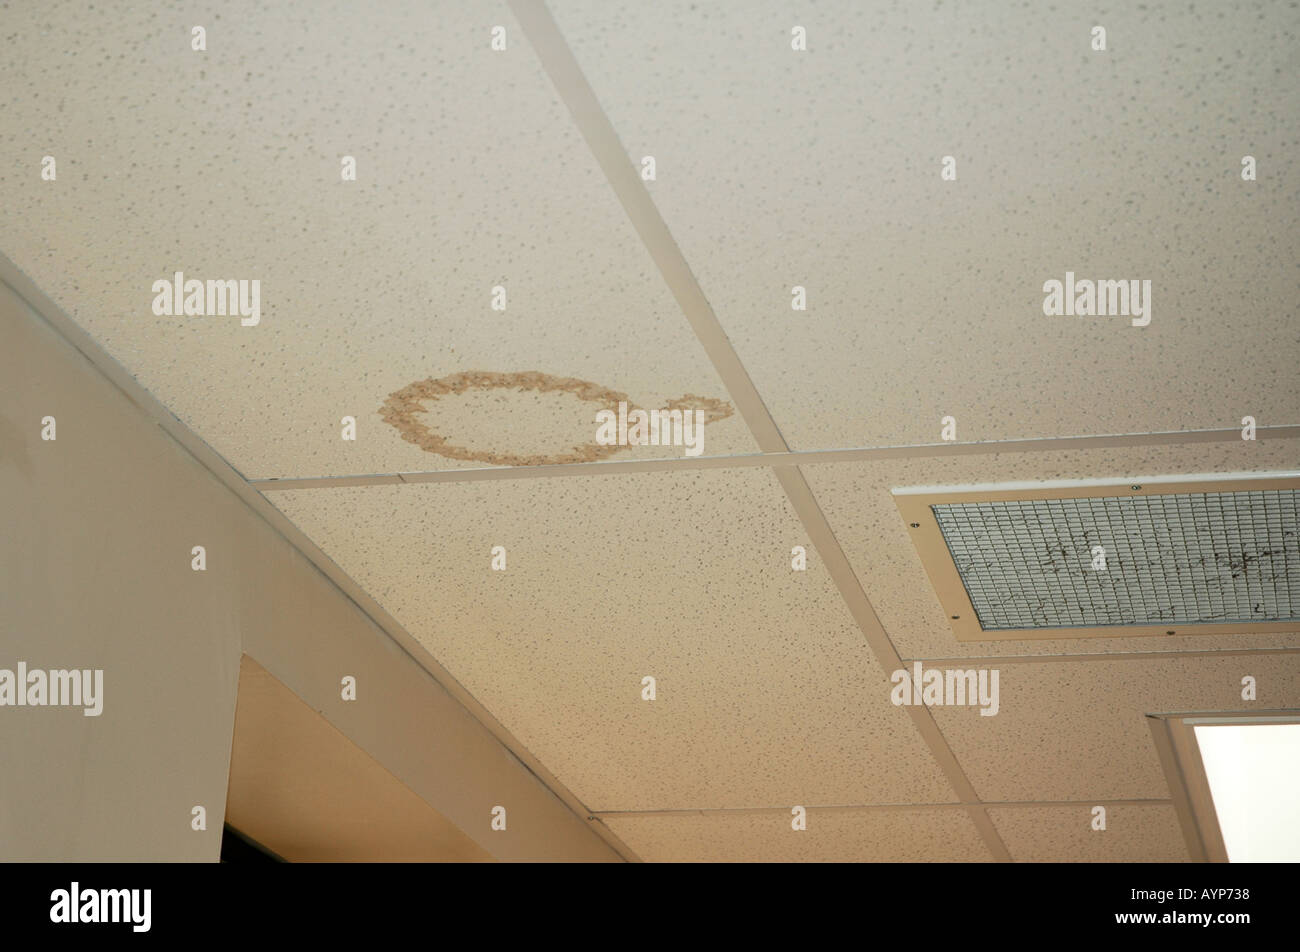 Damp Pentration Stain On Suspended Ceiling Stock Photo